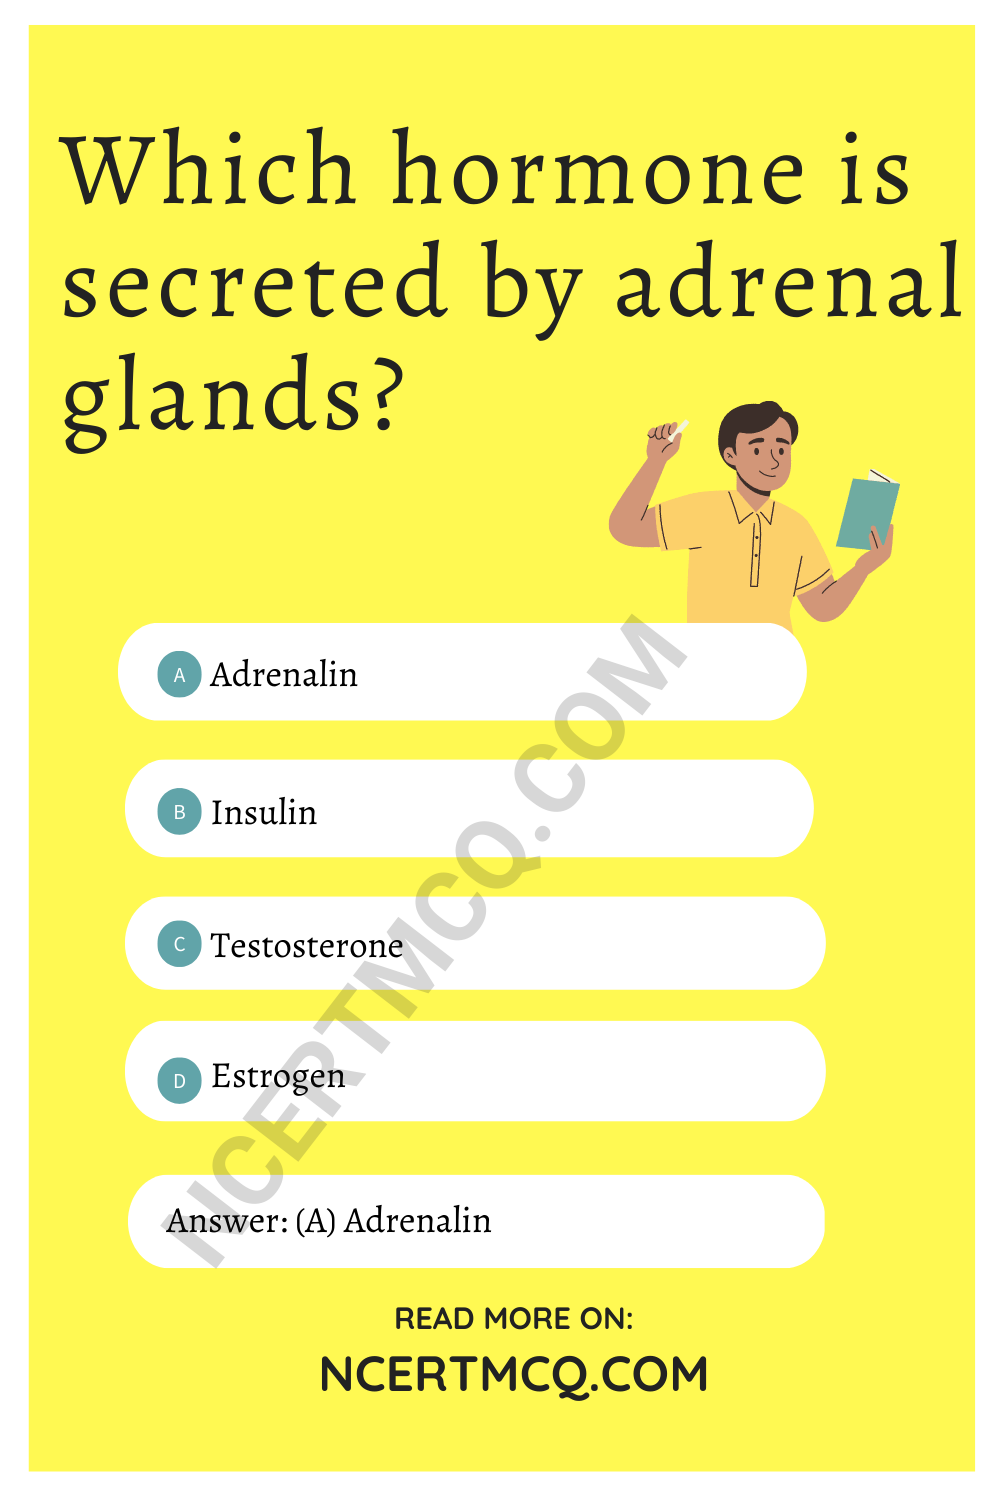 Which hormone is secreted by adrenal glands?